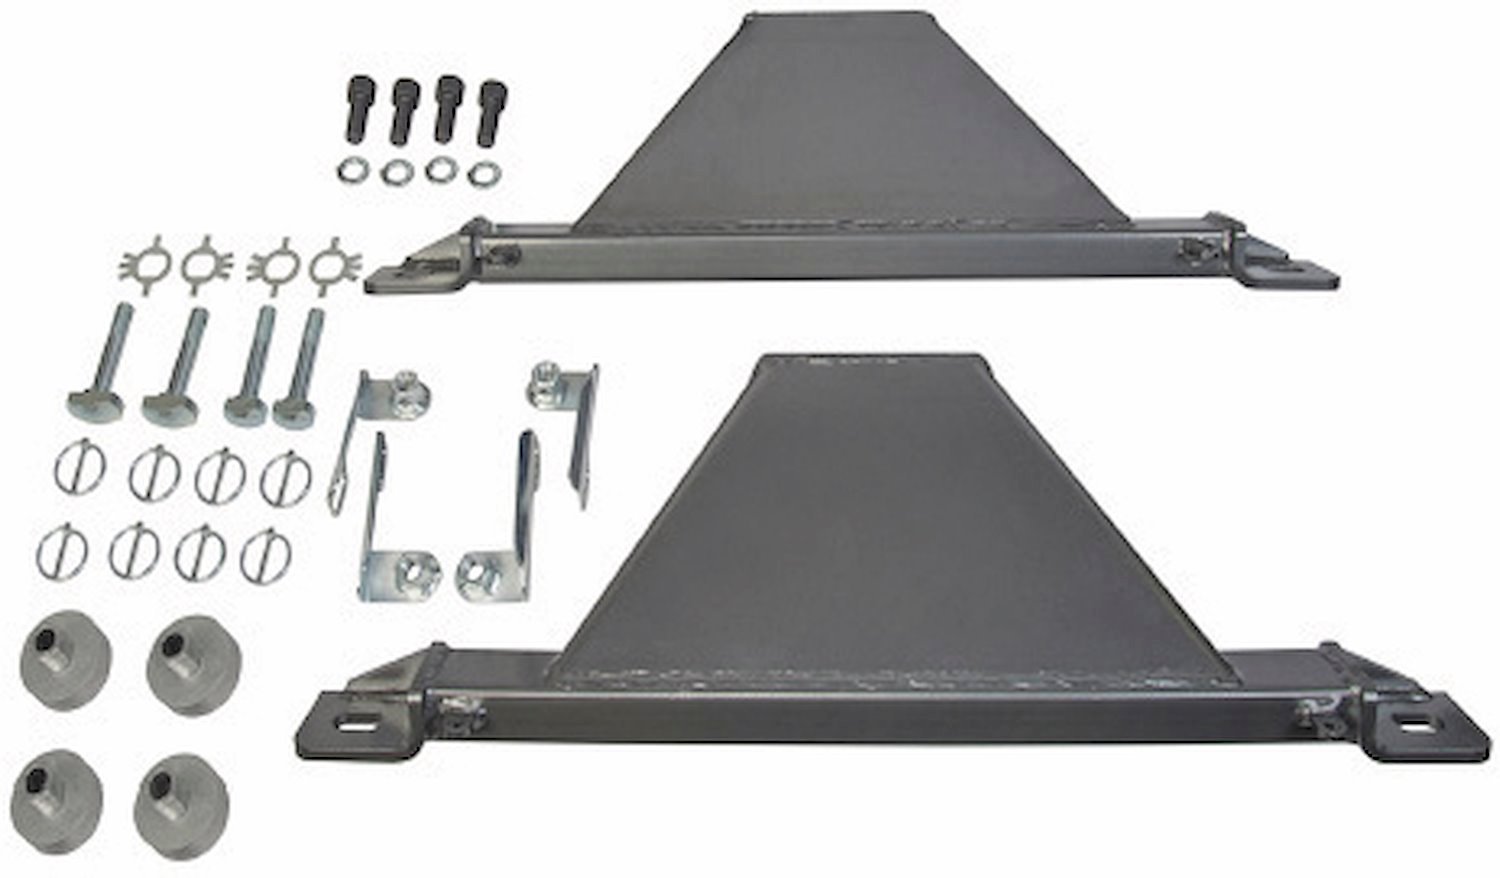 33000 Replacement OEM Upright Legs 26000 Towing Capacity Set Of 2, Gray